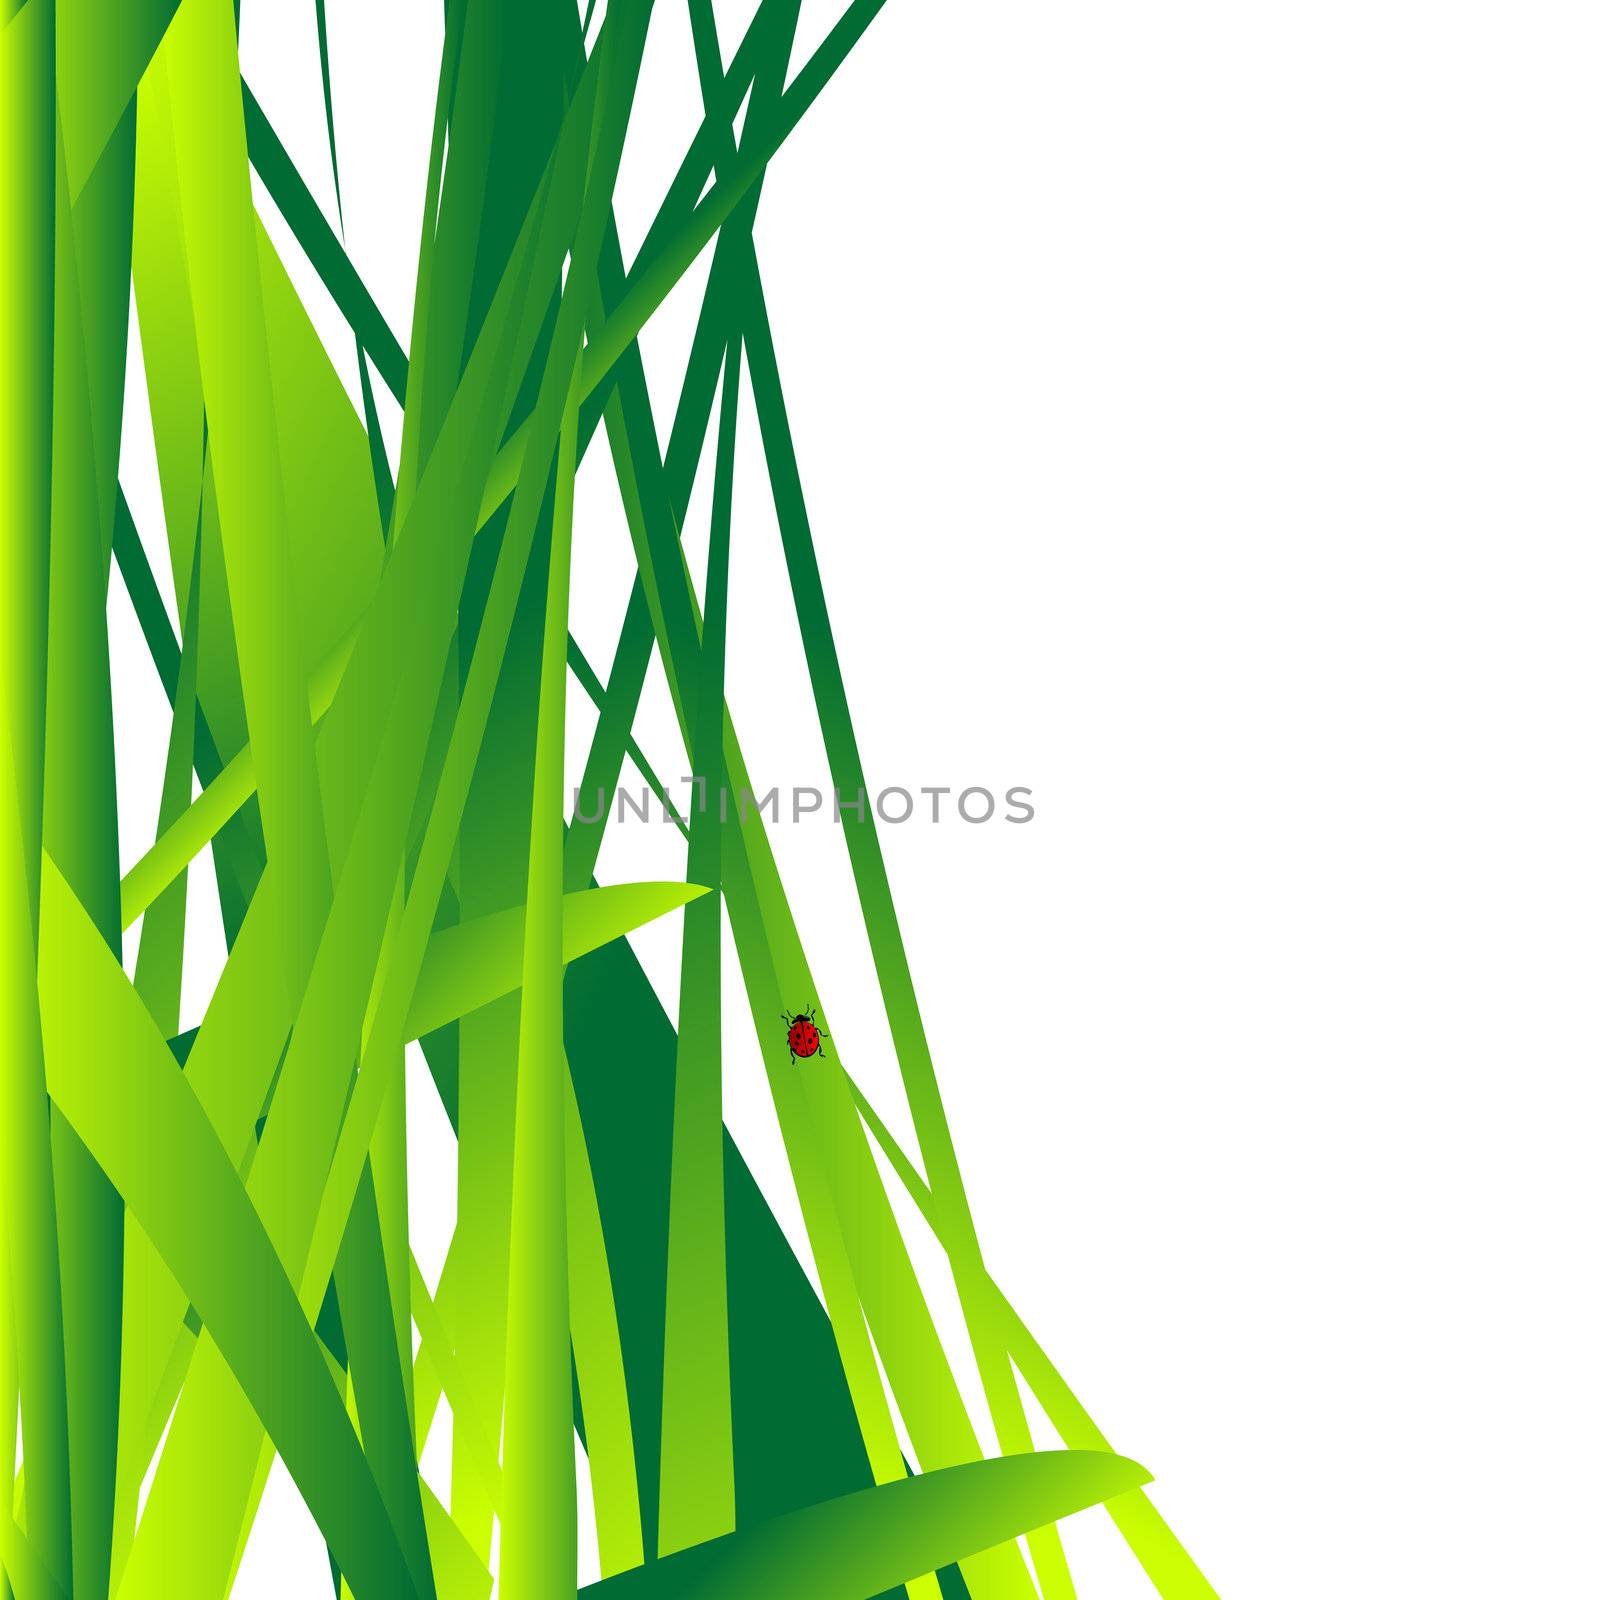 Fresh grass leaves background by Lirch